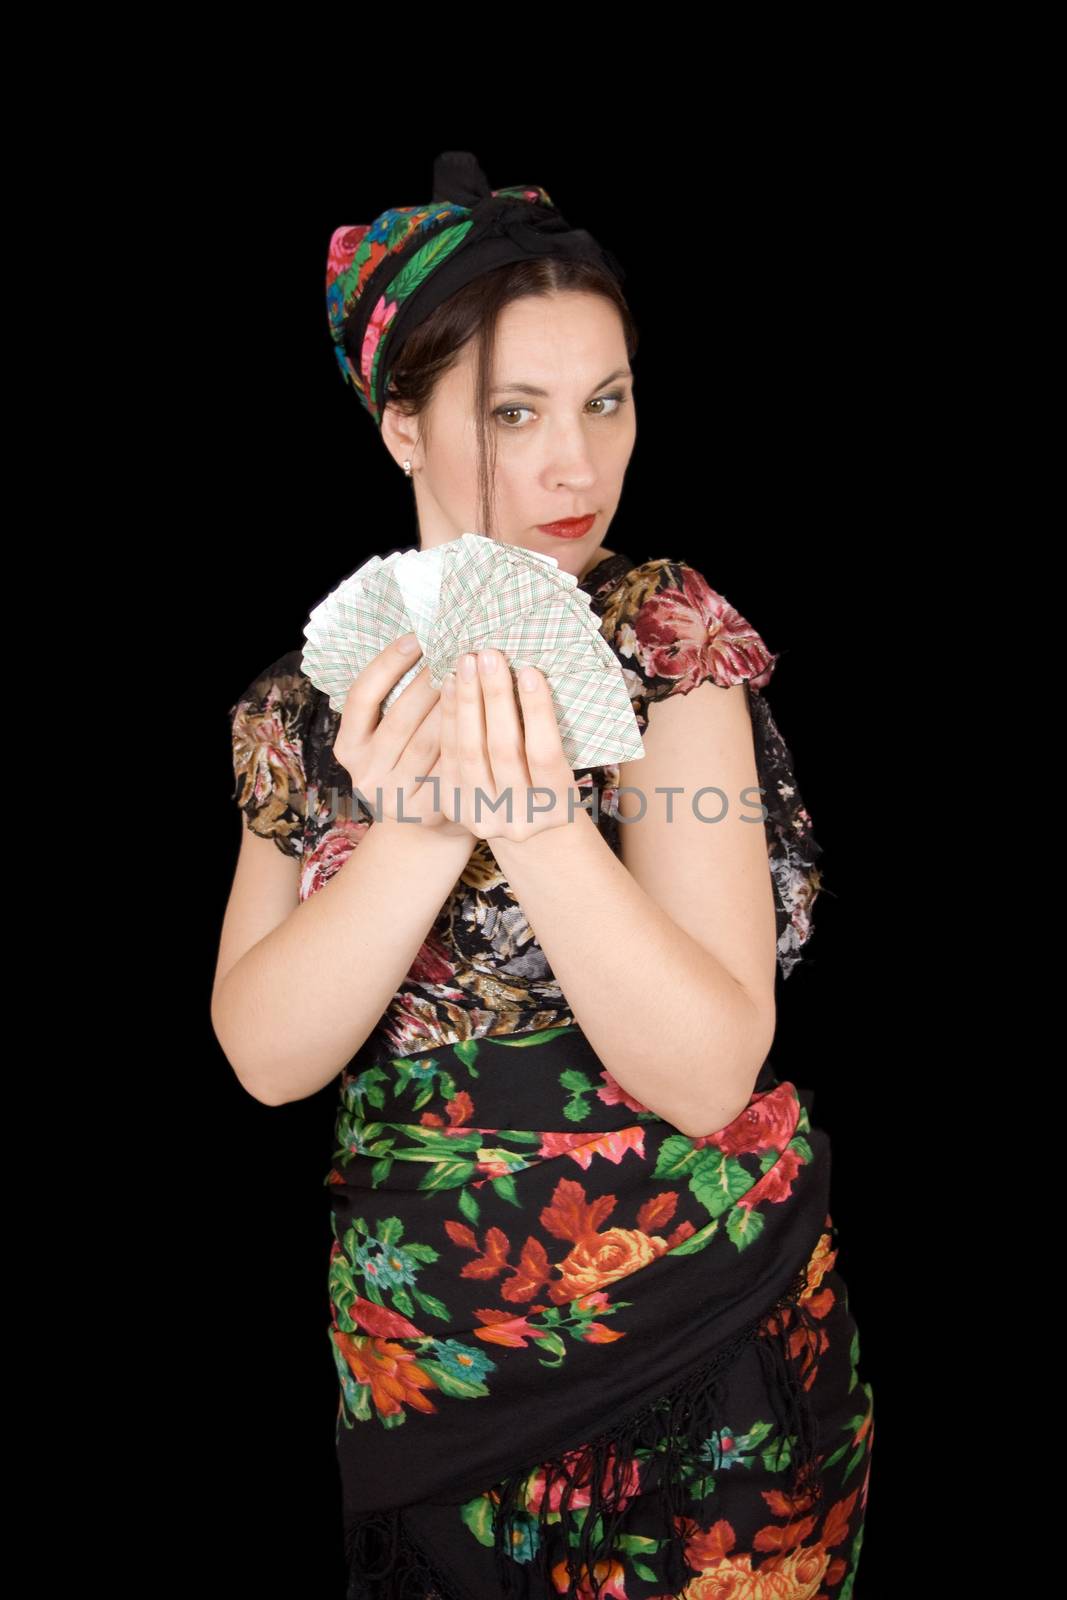 Gypsy woman with cards in hand on black background